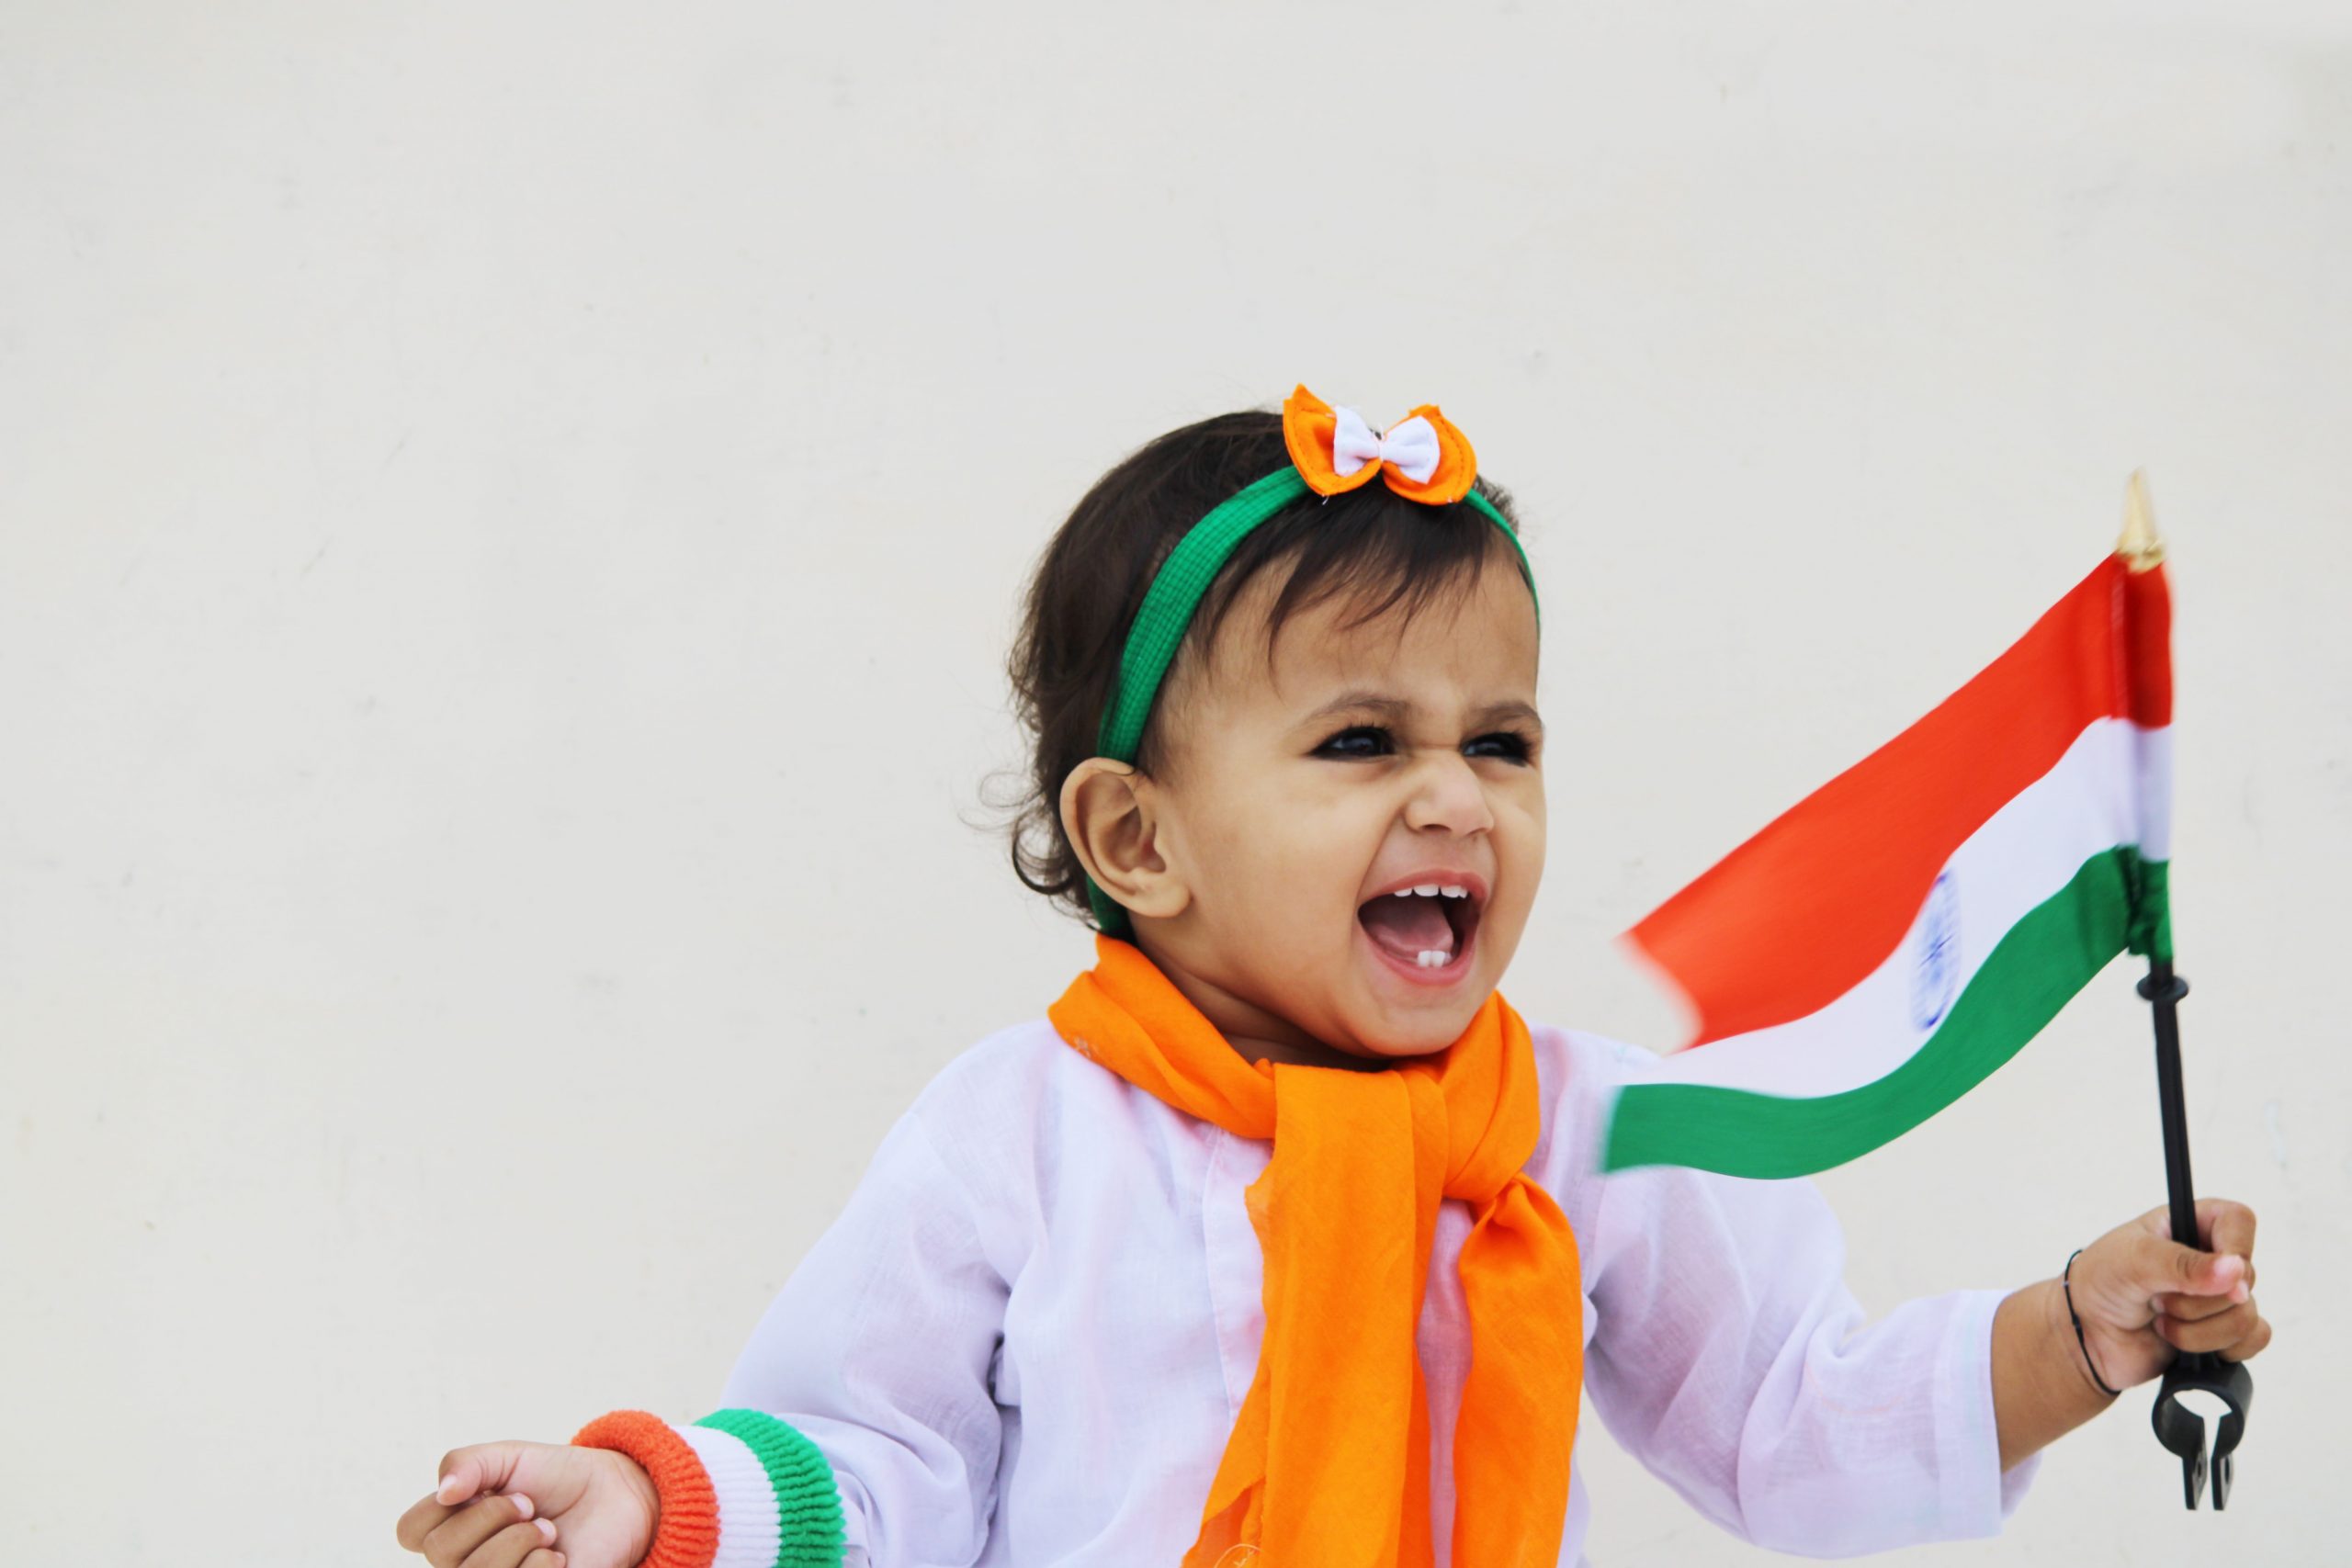 Cute kids kuhu chouhan on the occasion india independence day.